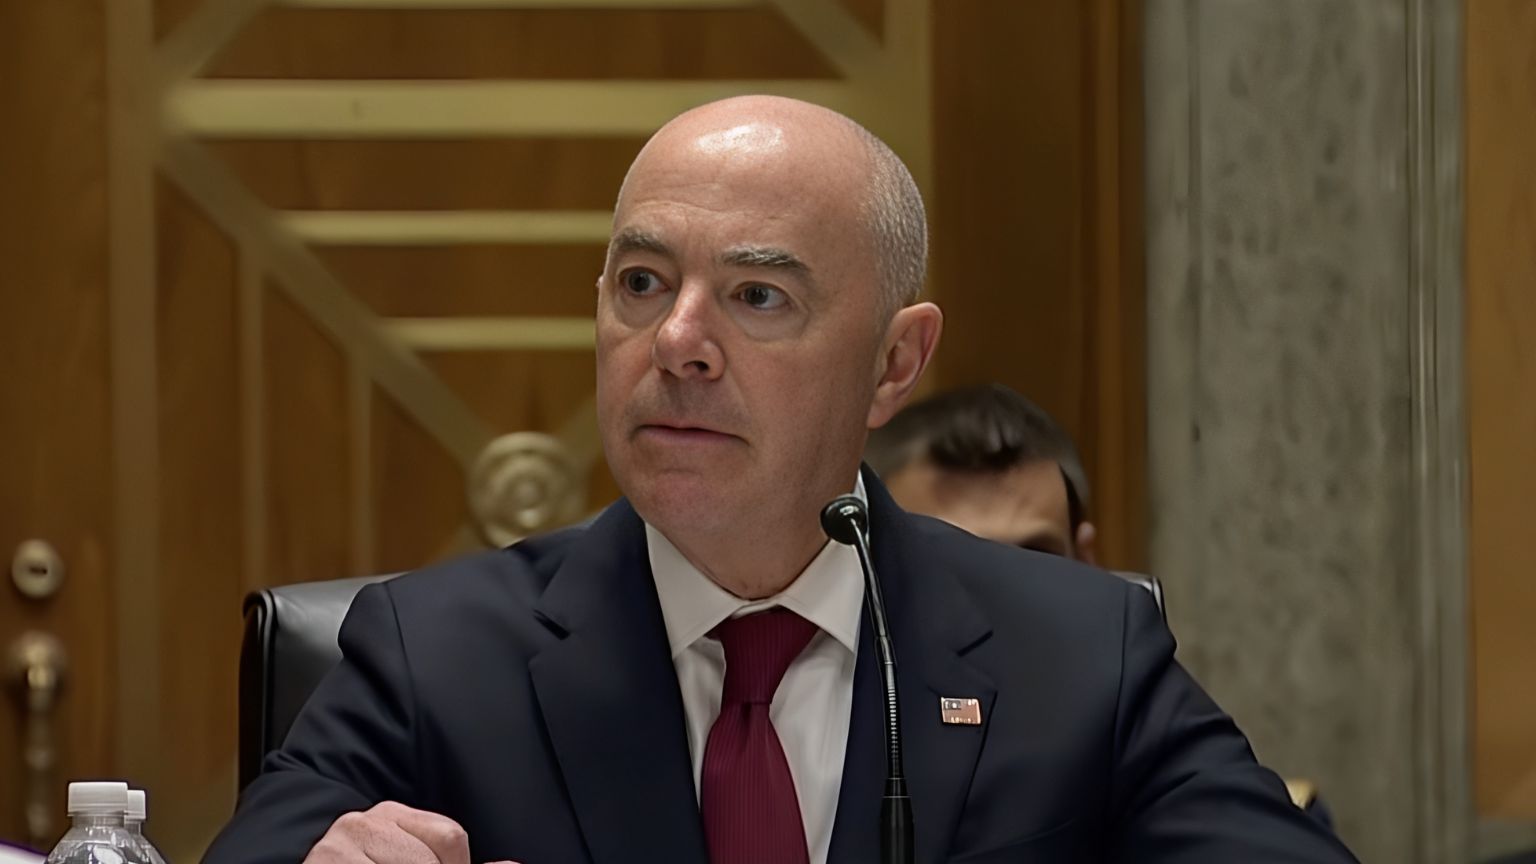 DHS won’t hand over full details about “anti-disinformation” practices